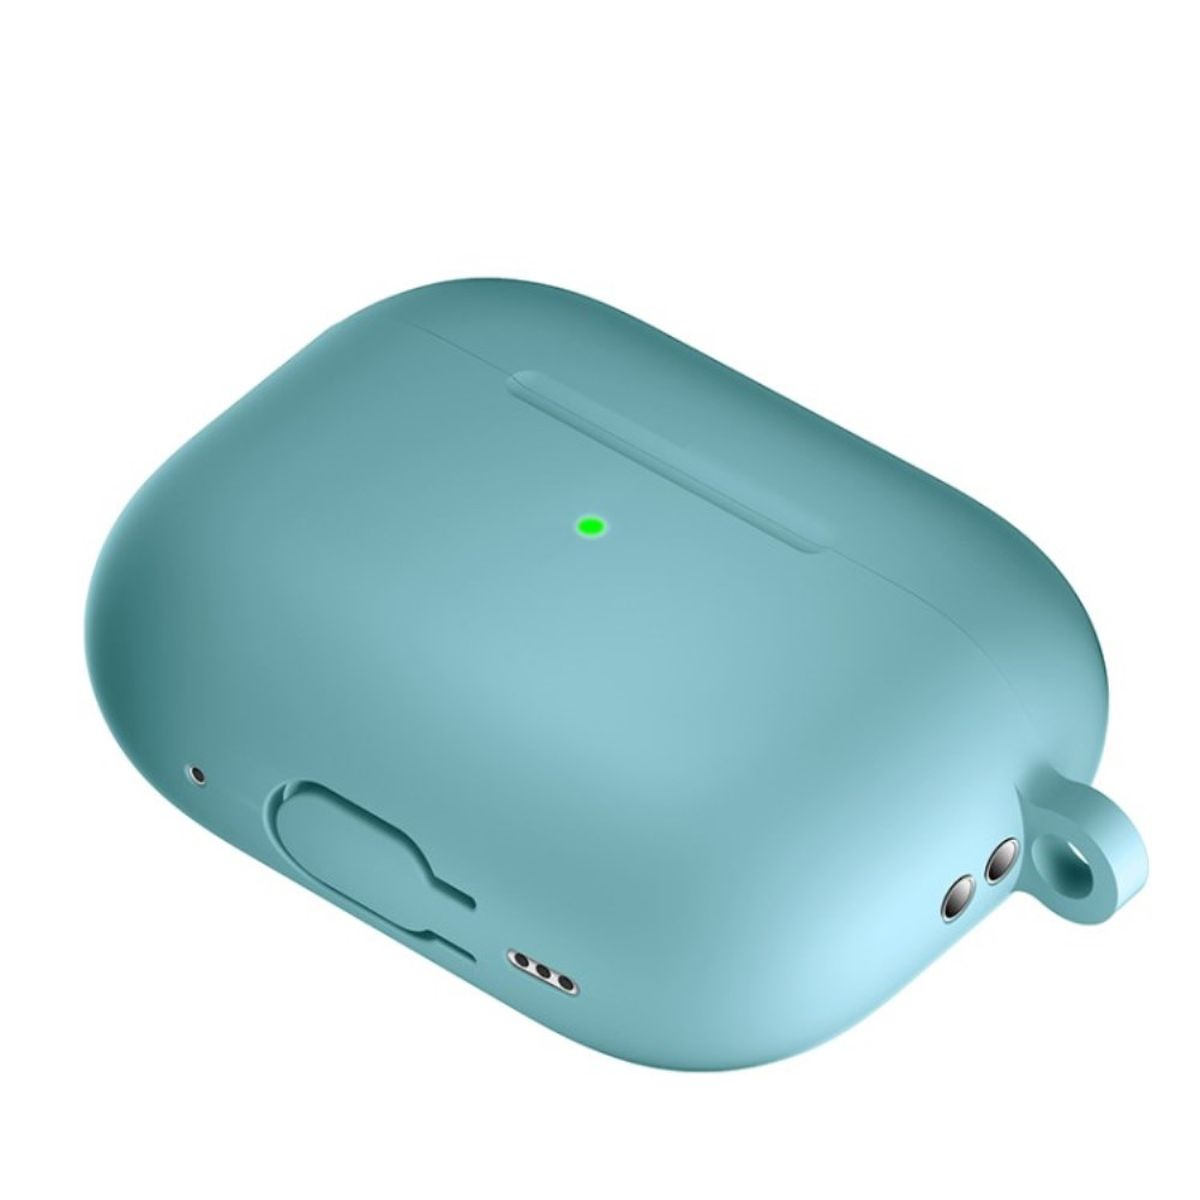 für Pro COVERKINGZ 77380 mint, Ladecase 2 Silikoncover Unisex, Apple Airpods